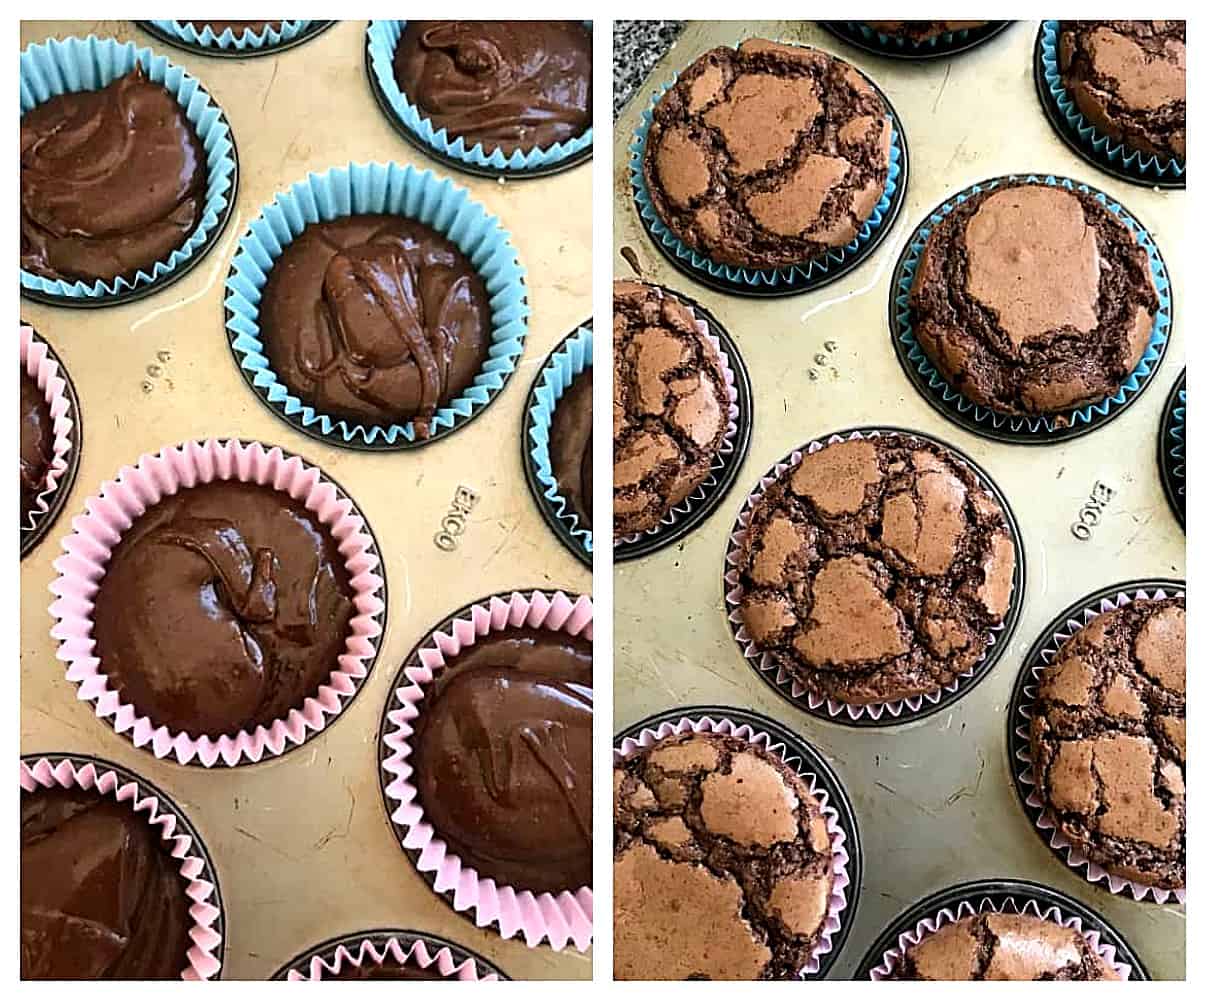 Raw and baked chocolate muffins in pan; image collage